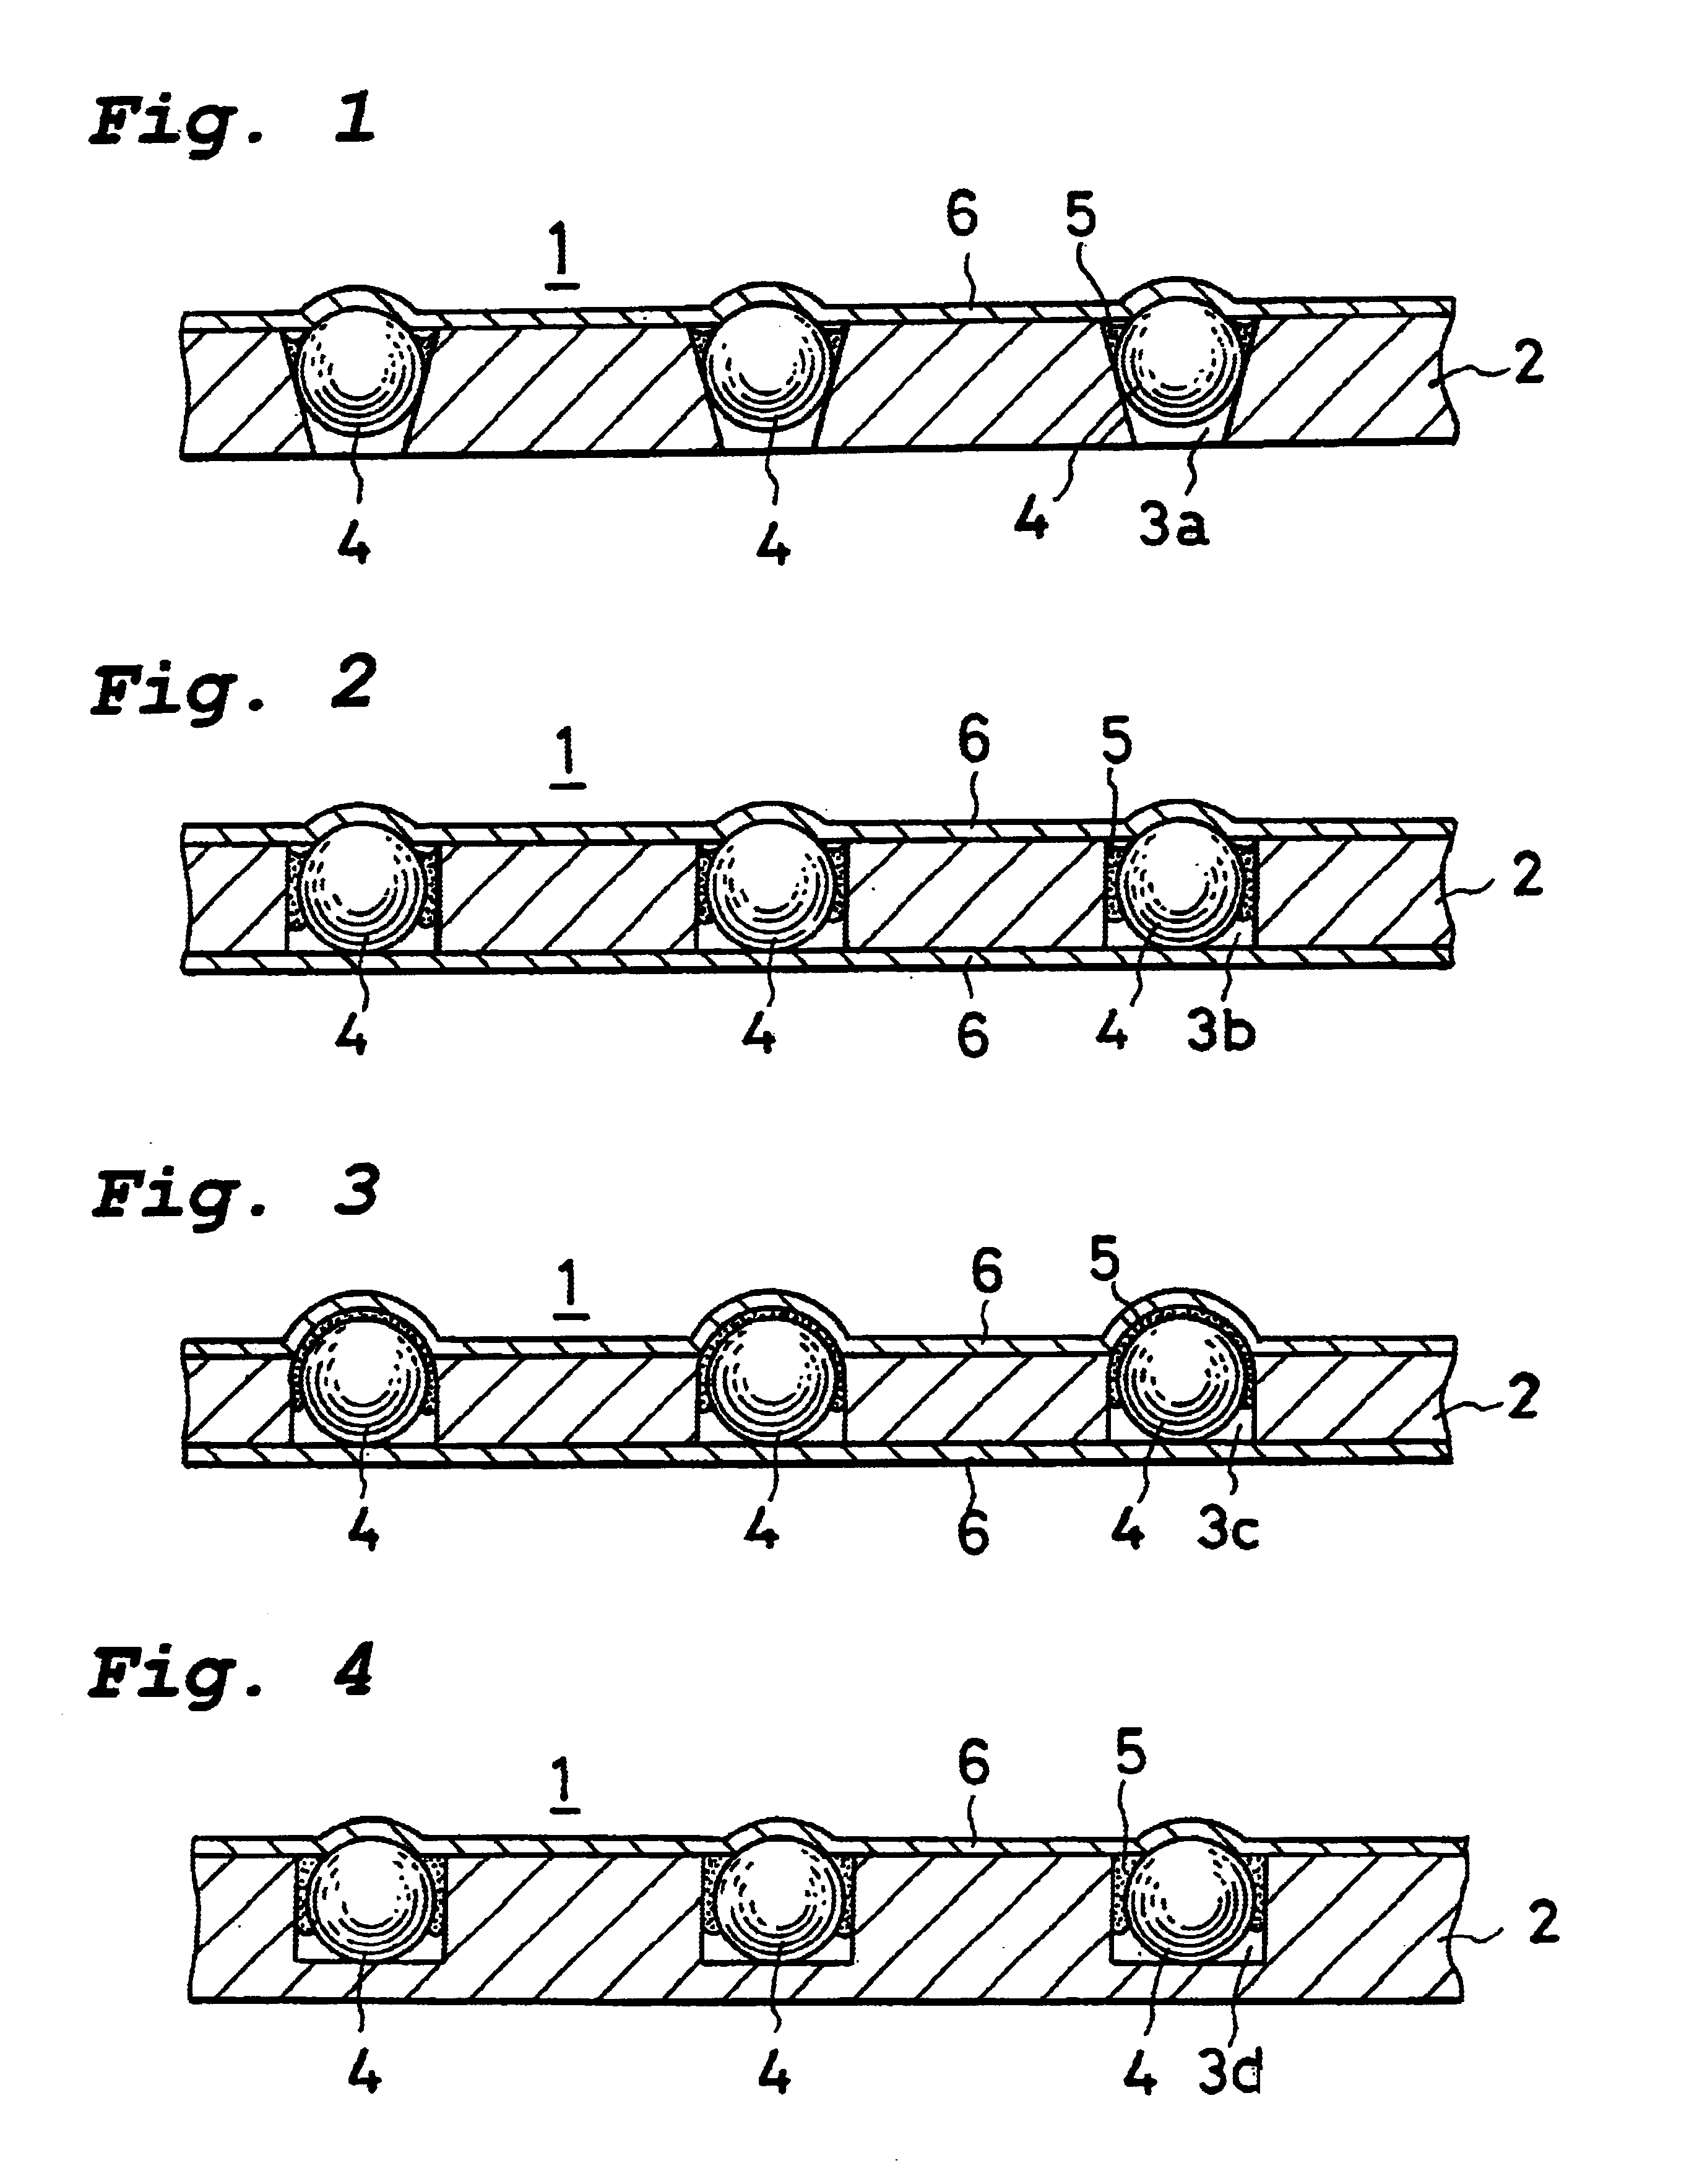 Solder ball assembly, a method for its manufacture, and a method of forming solder bumps